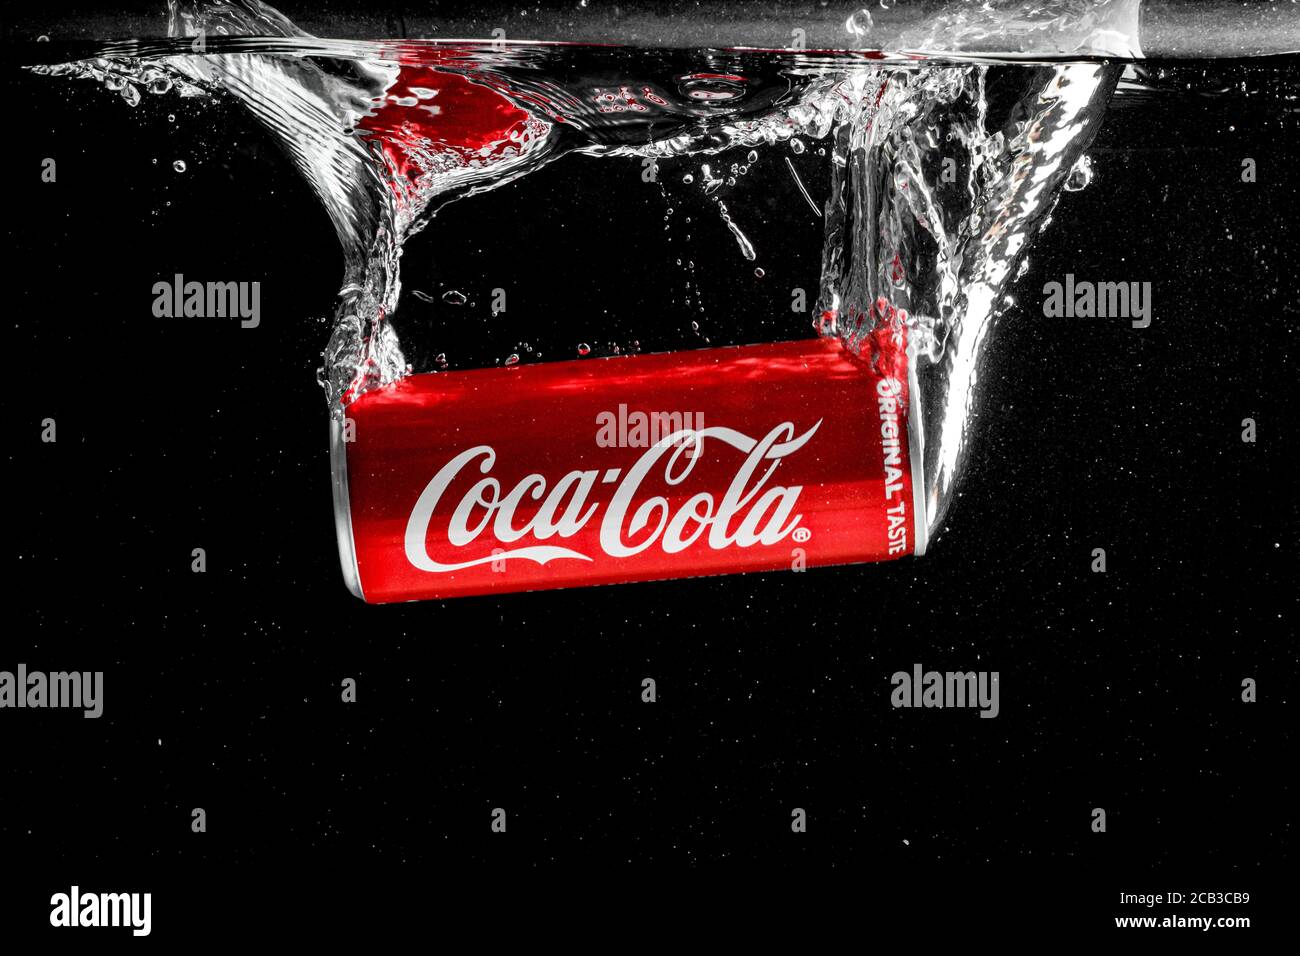 Coca cola can splashing in to water on black background Stock Photo - Alamy